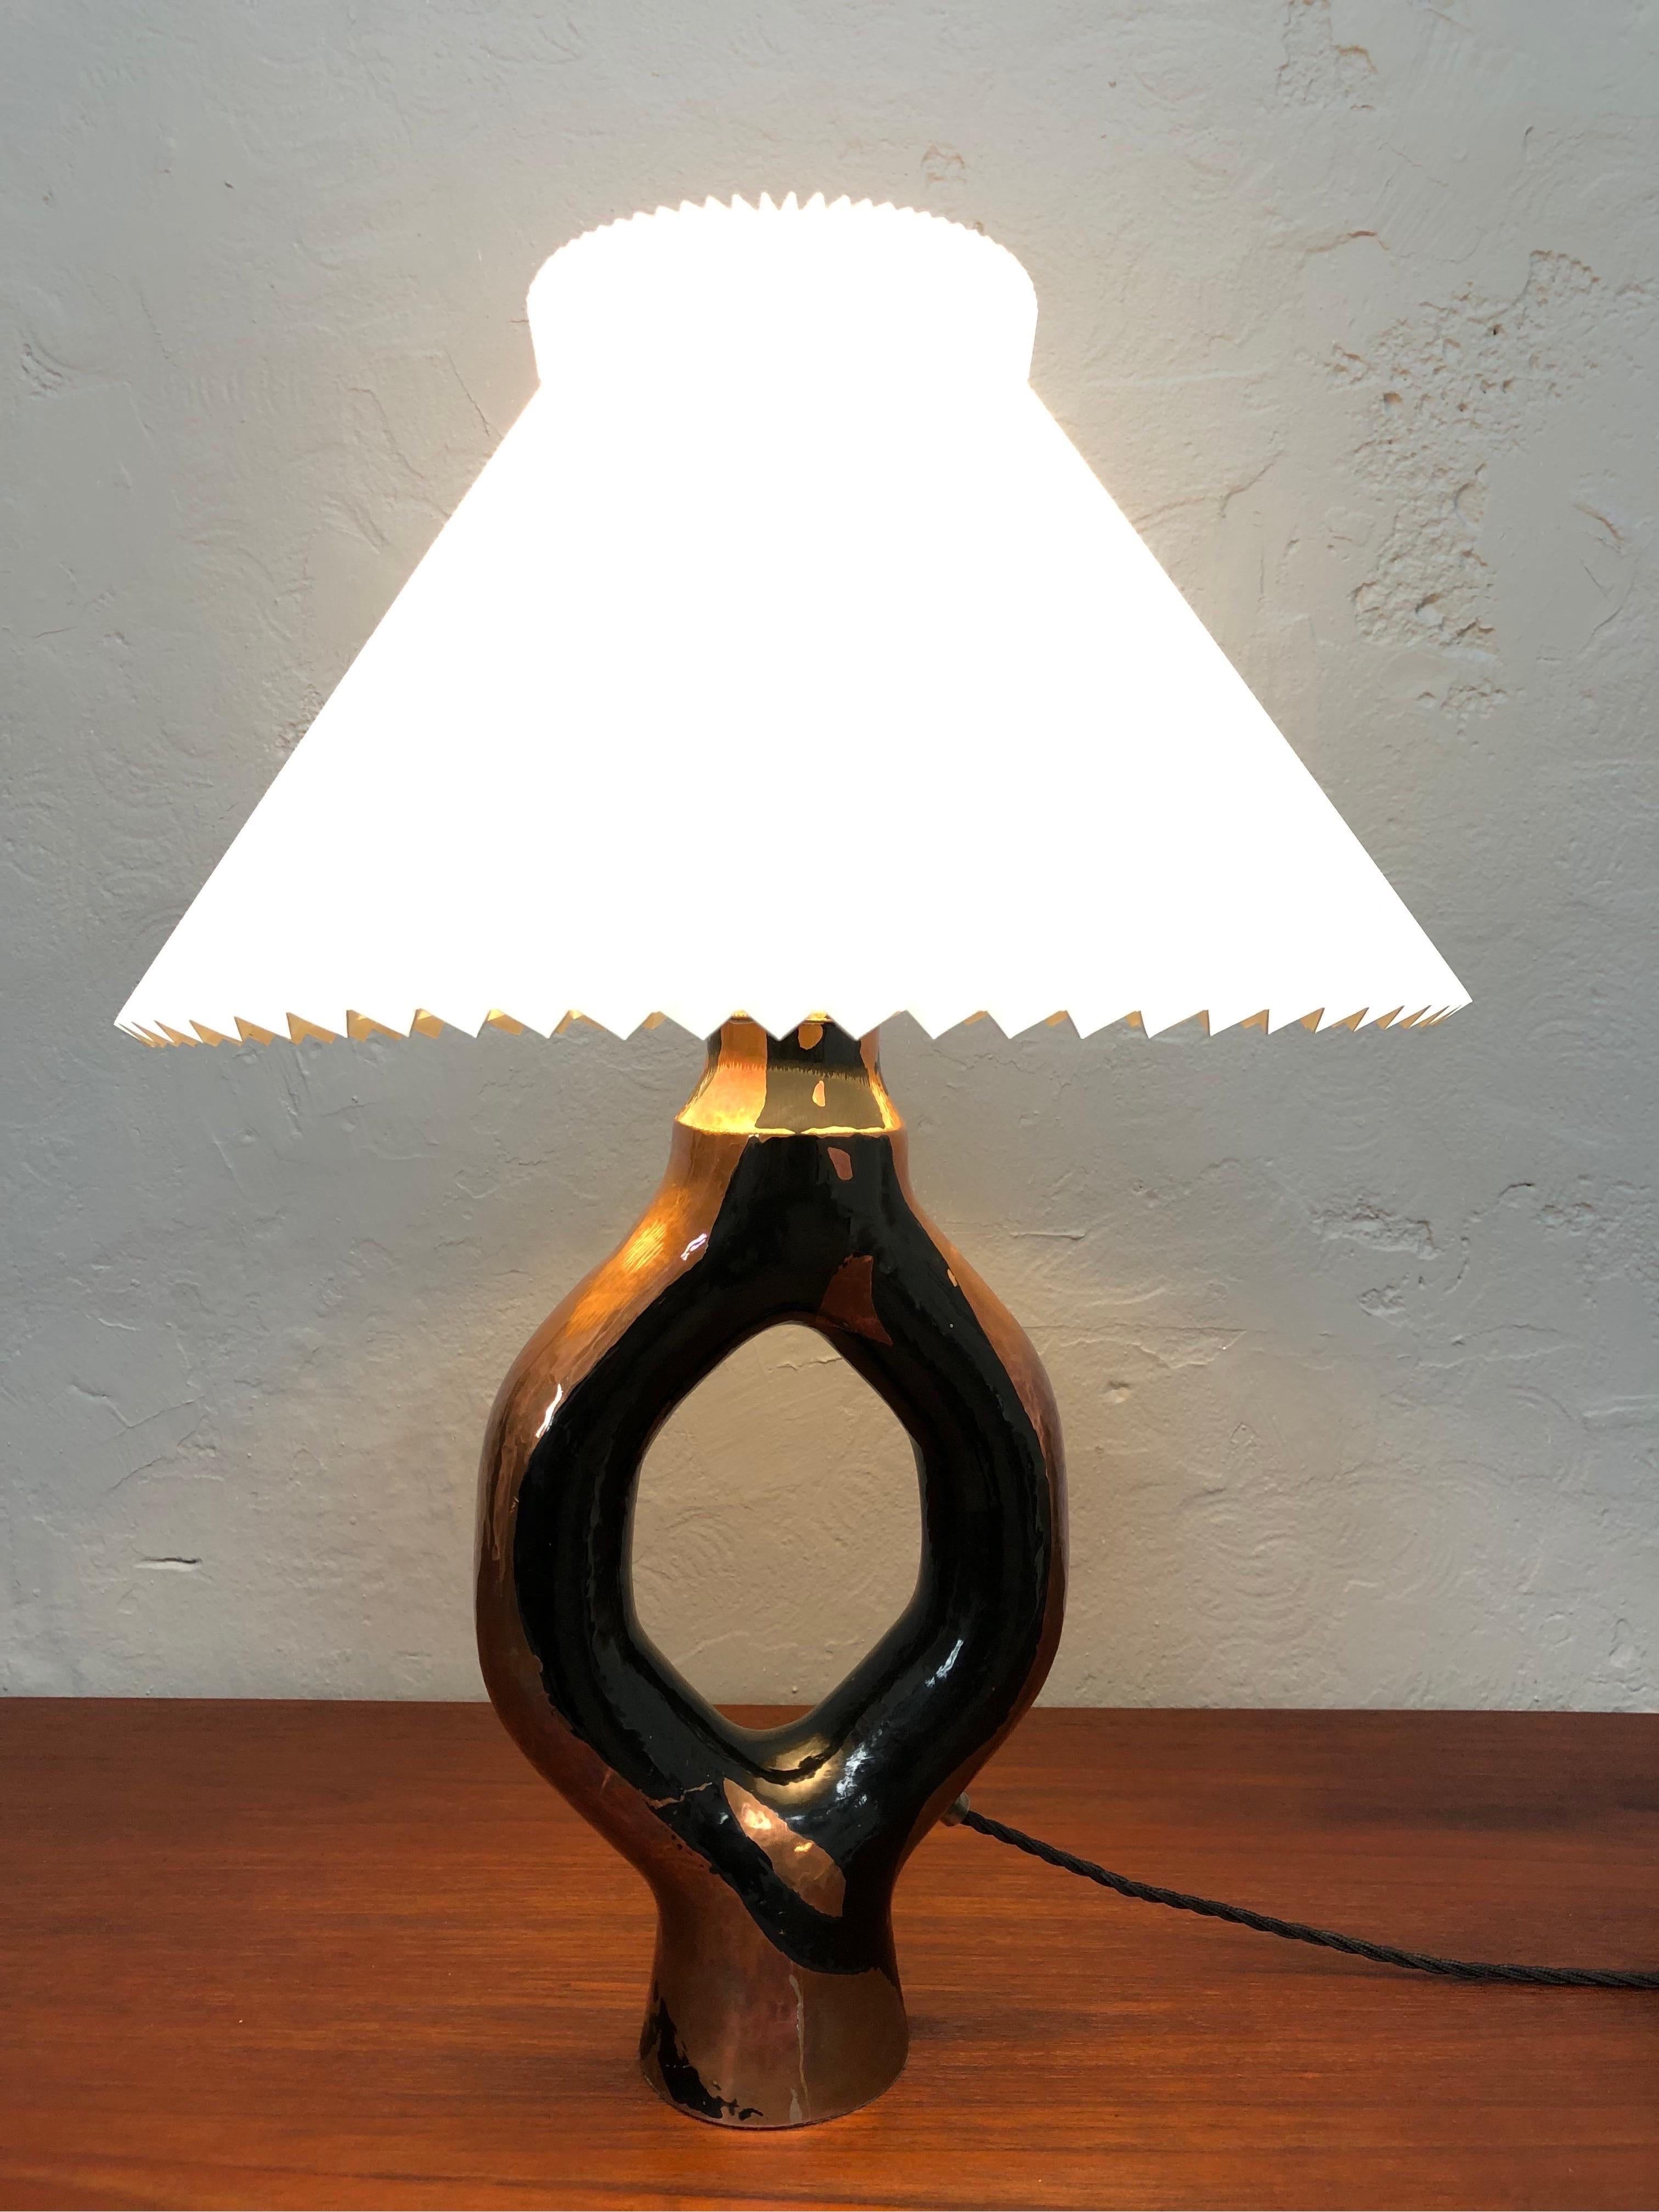 Vintage sculptural artisan table lamp from the 1960s in copper.
Skillfully made in a beautiful period design.
More than likely that this is a piece of unica.
The lamp has been cleaned, Rewired with a black cloth twisted flex and grounded.
Original